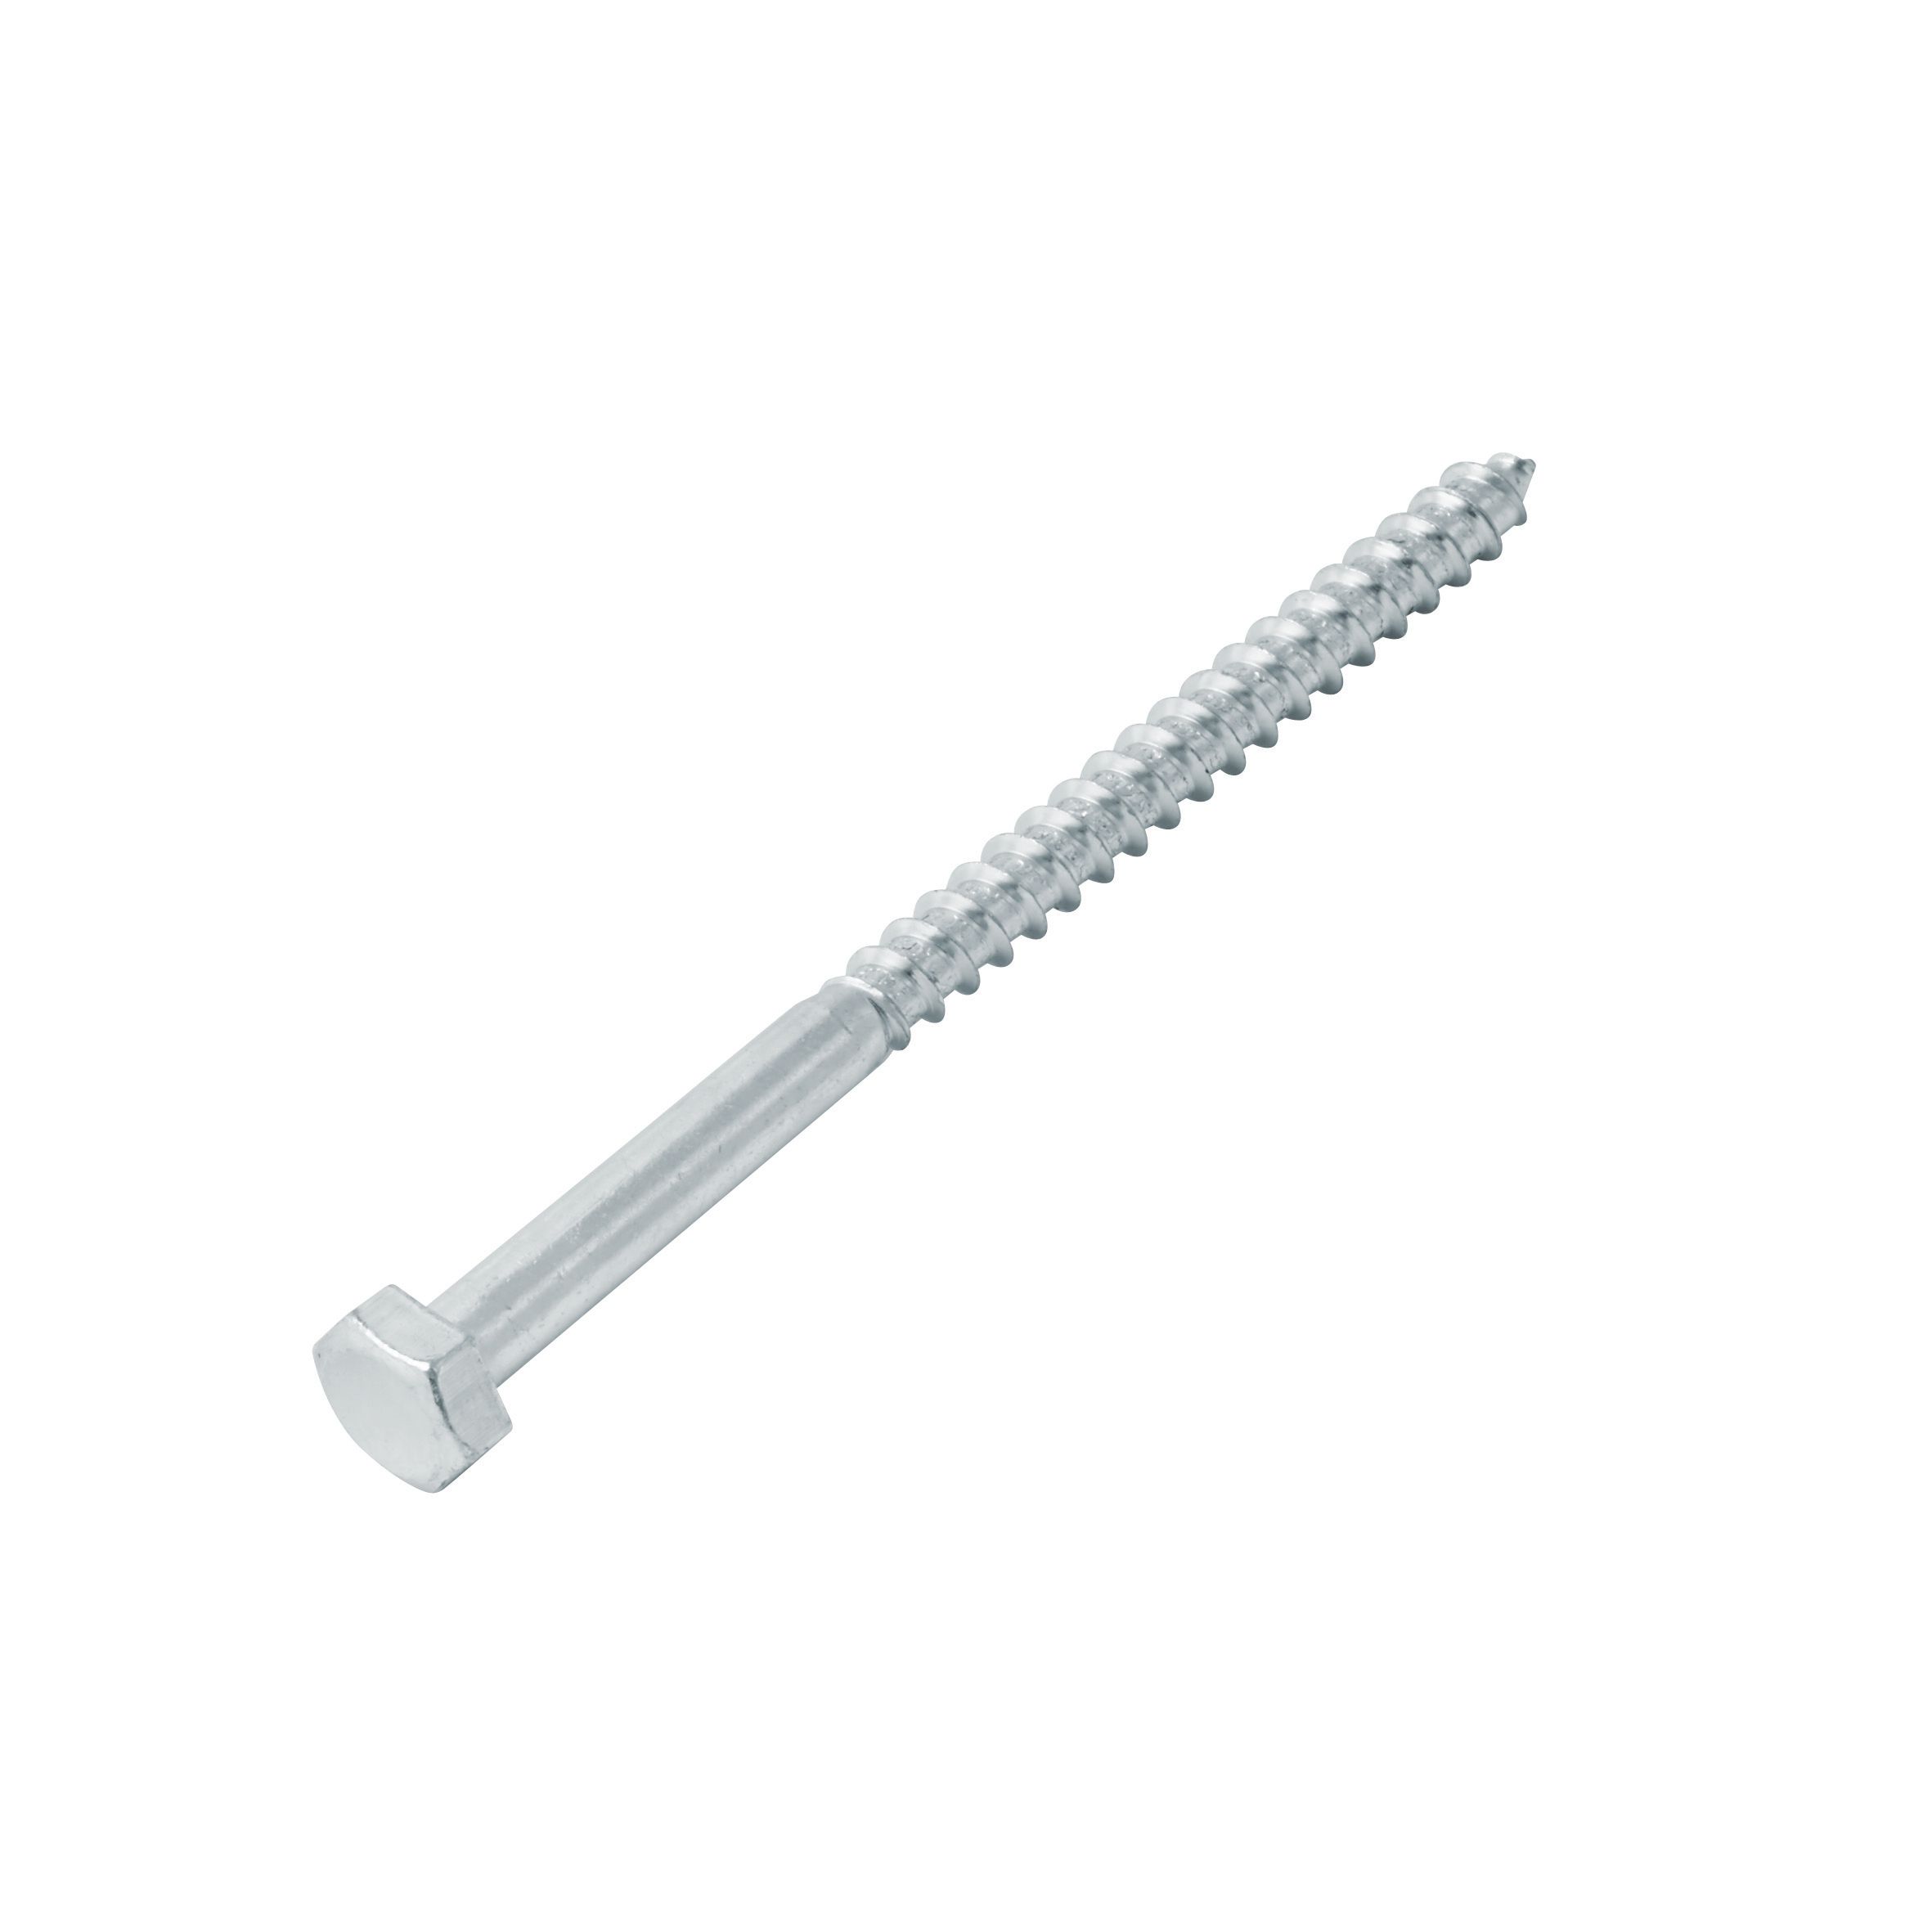 Image of Wickes Coach Screws - M6 x 50mm Pack of 12